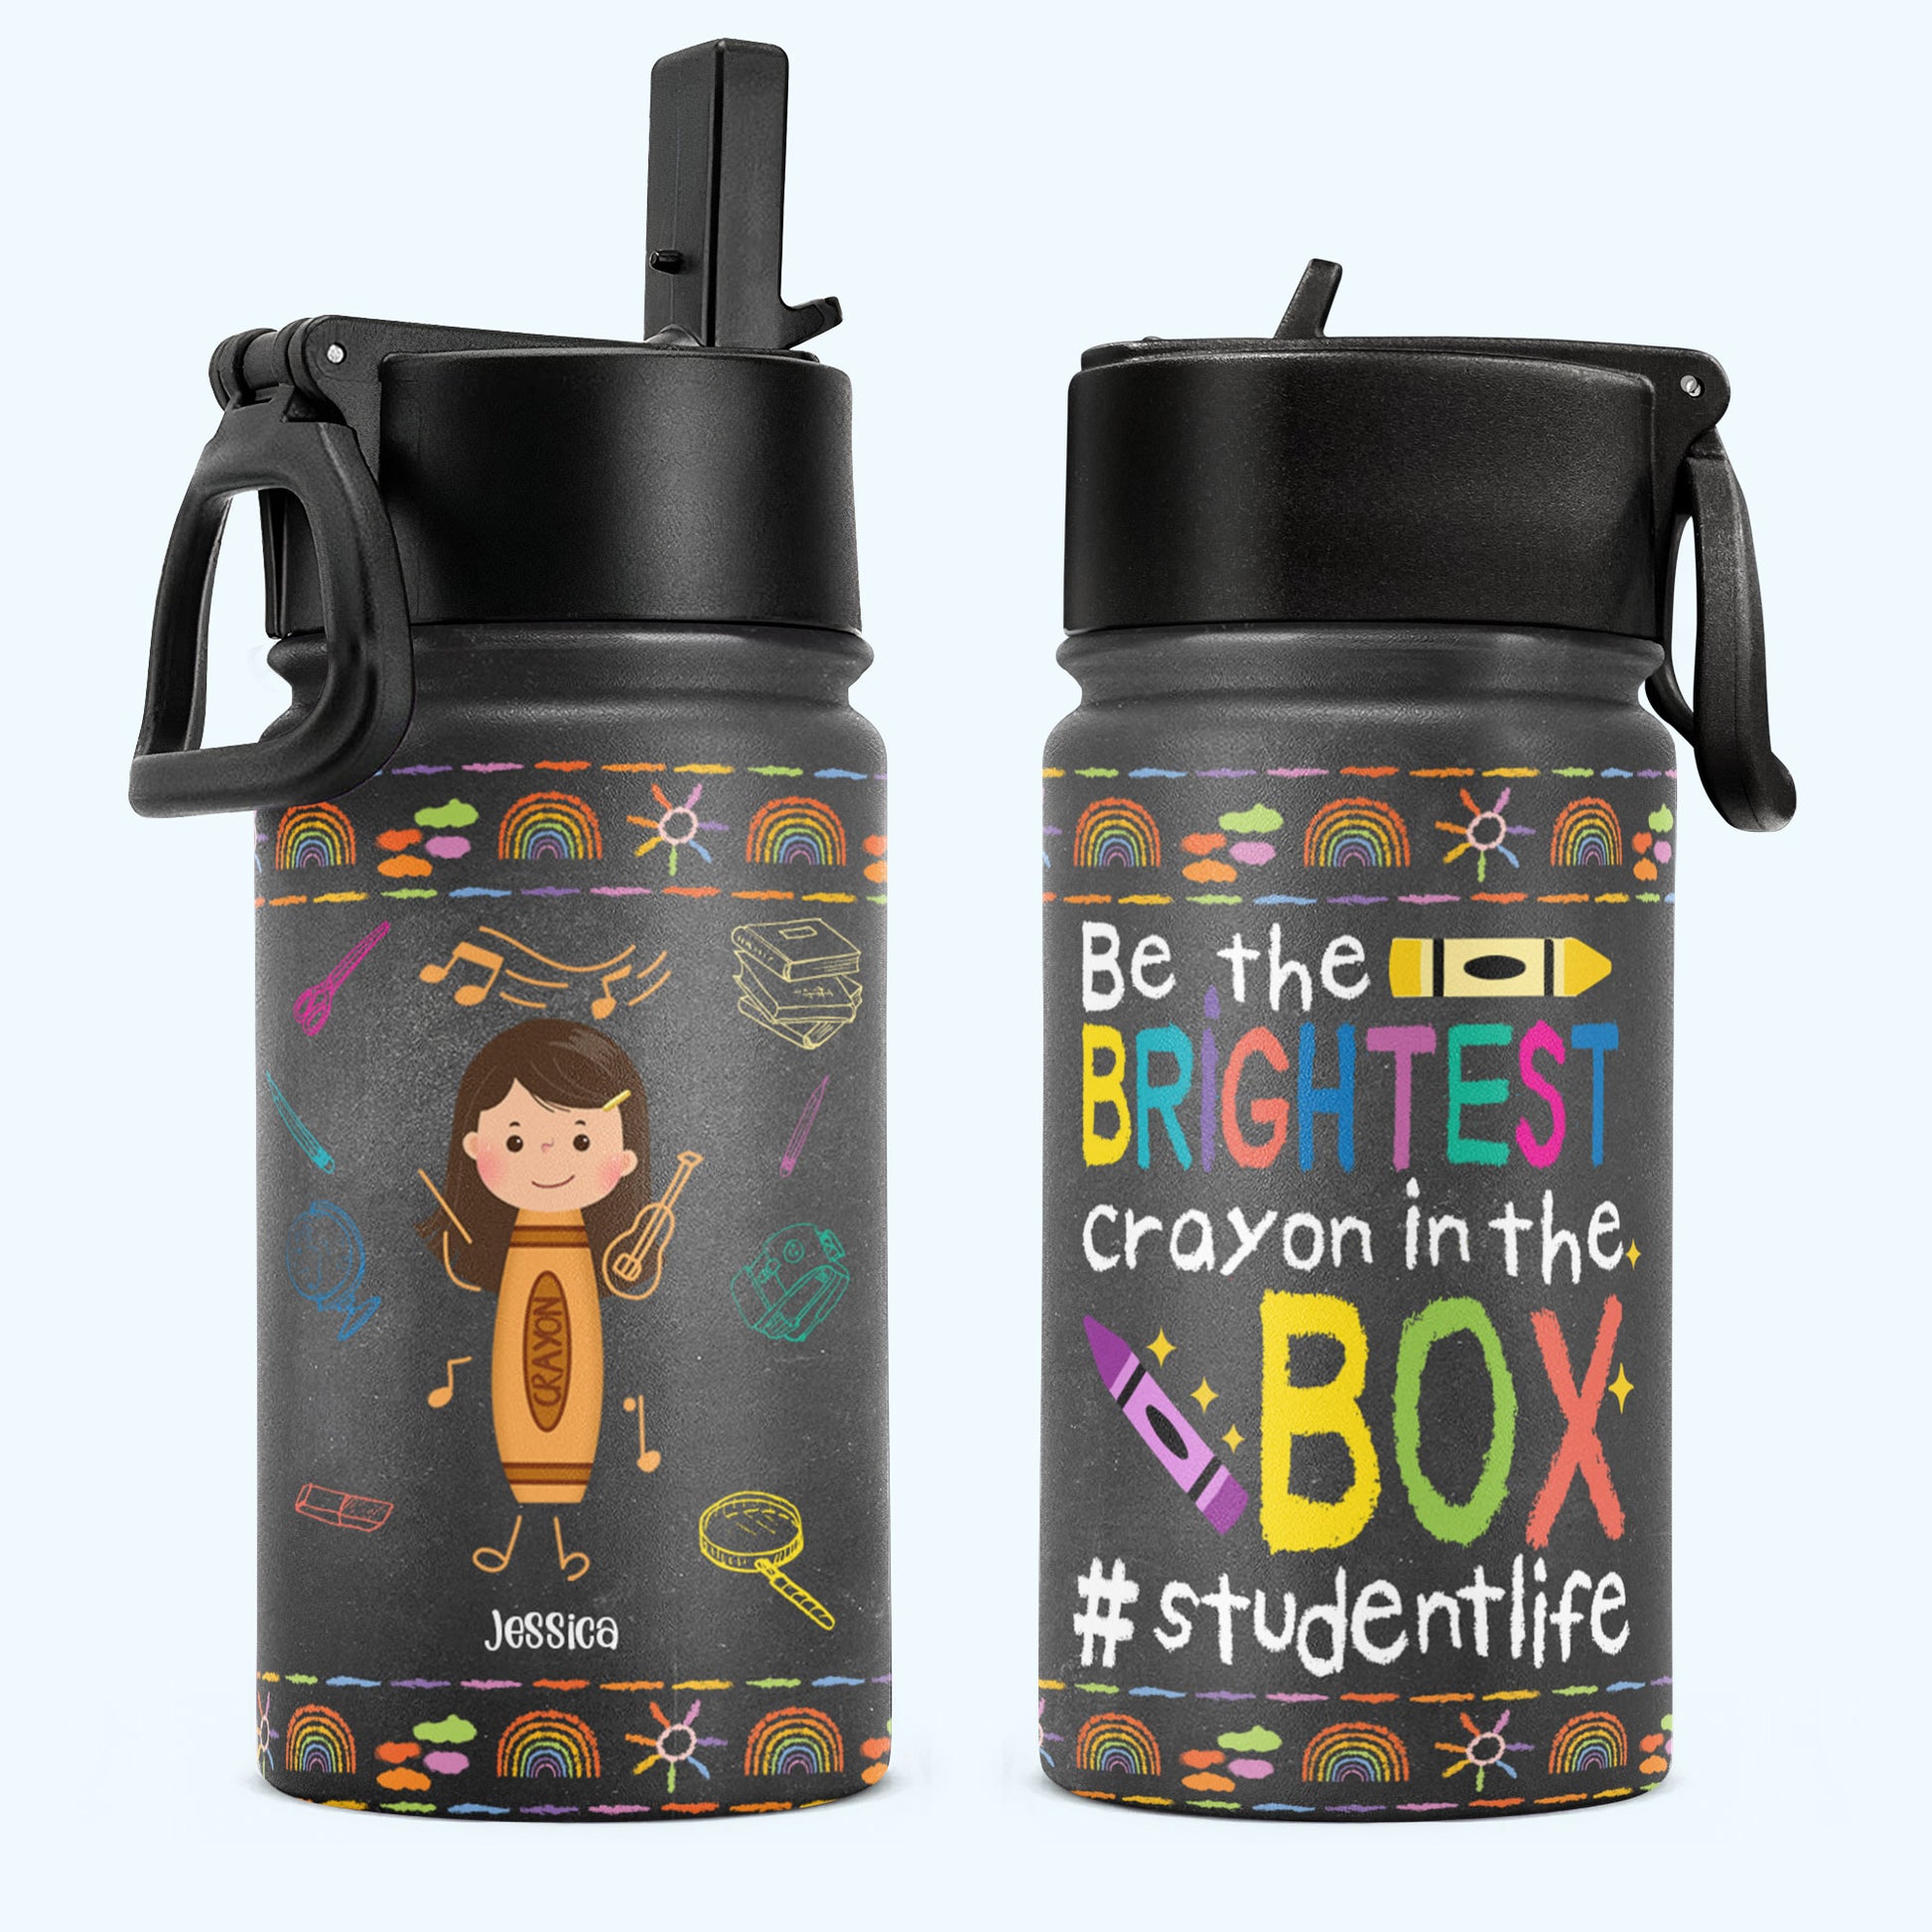 Brightest Crayon In The Box - Personalized Kids Water Bottle With Straw Lid - Back To School, Birthday Gift For Student, Kids, Schoolkids, Son, Daughter - Crayon Kid